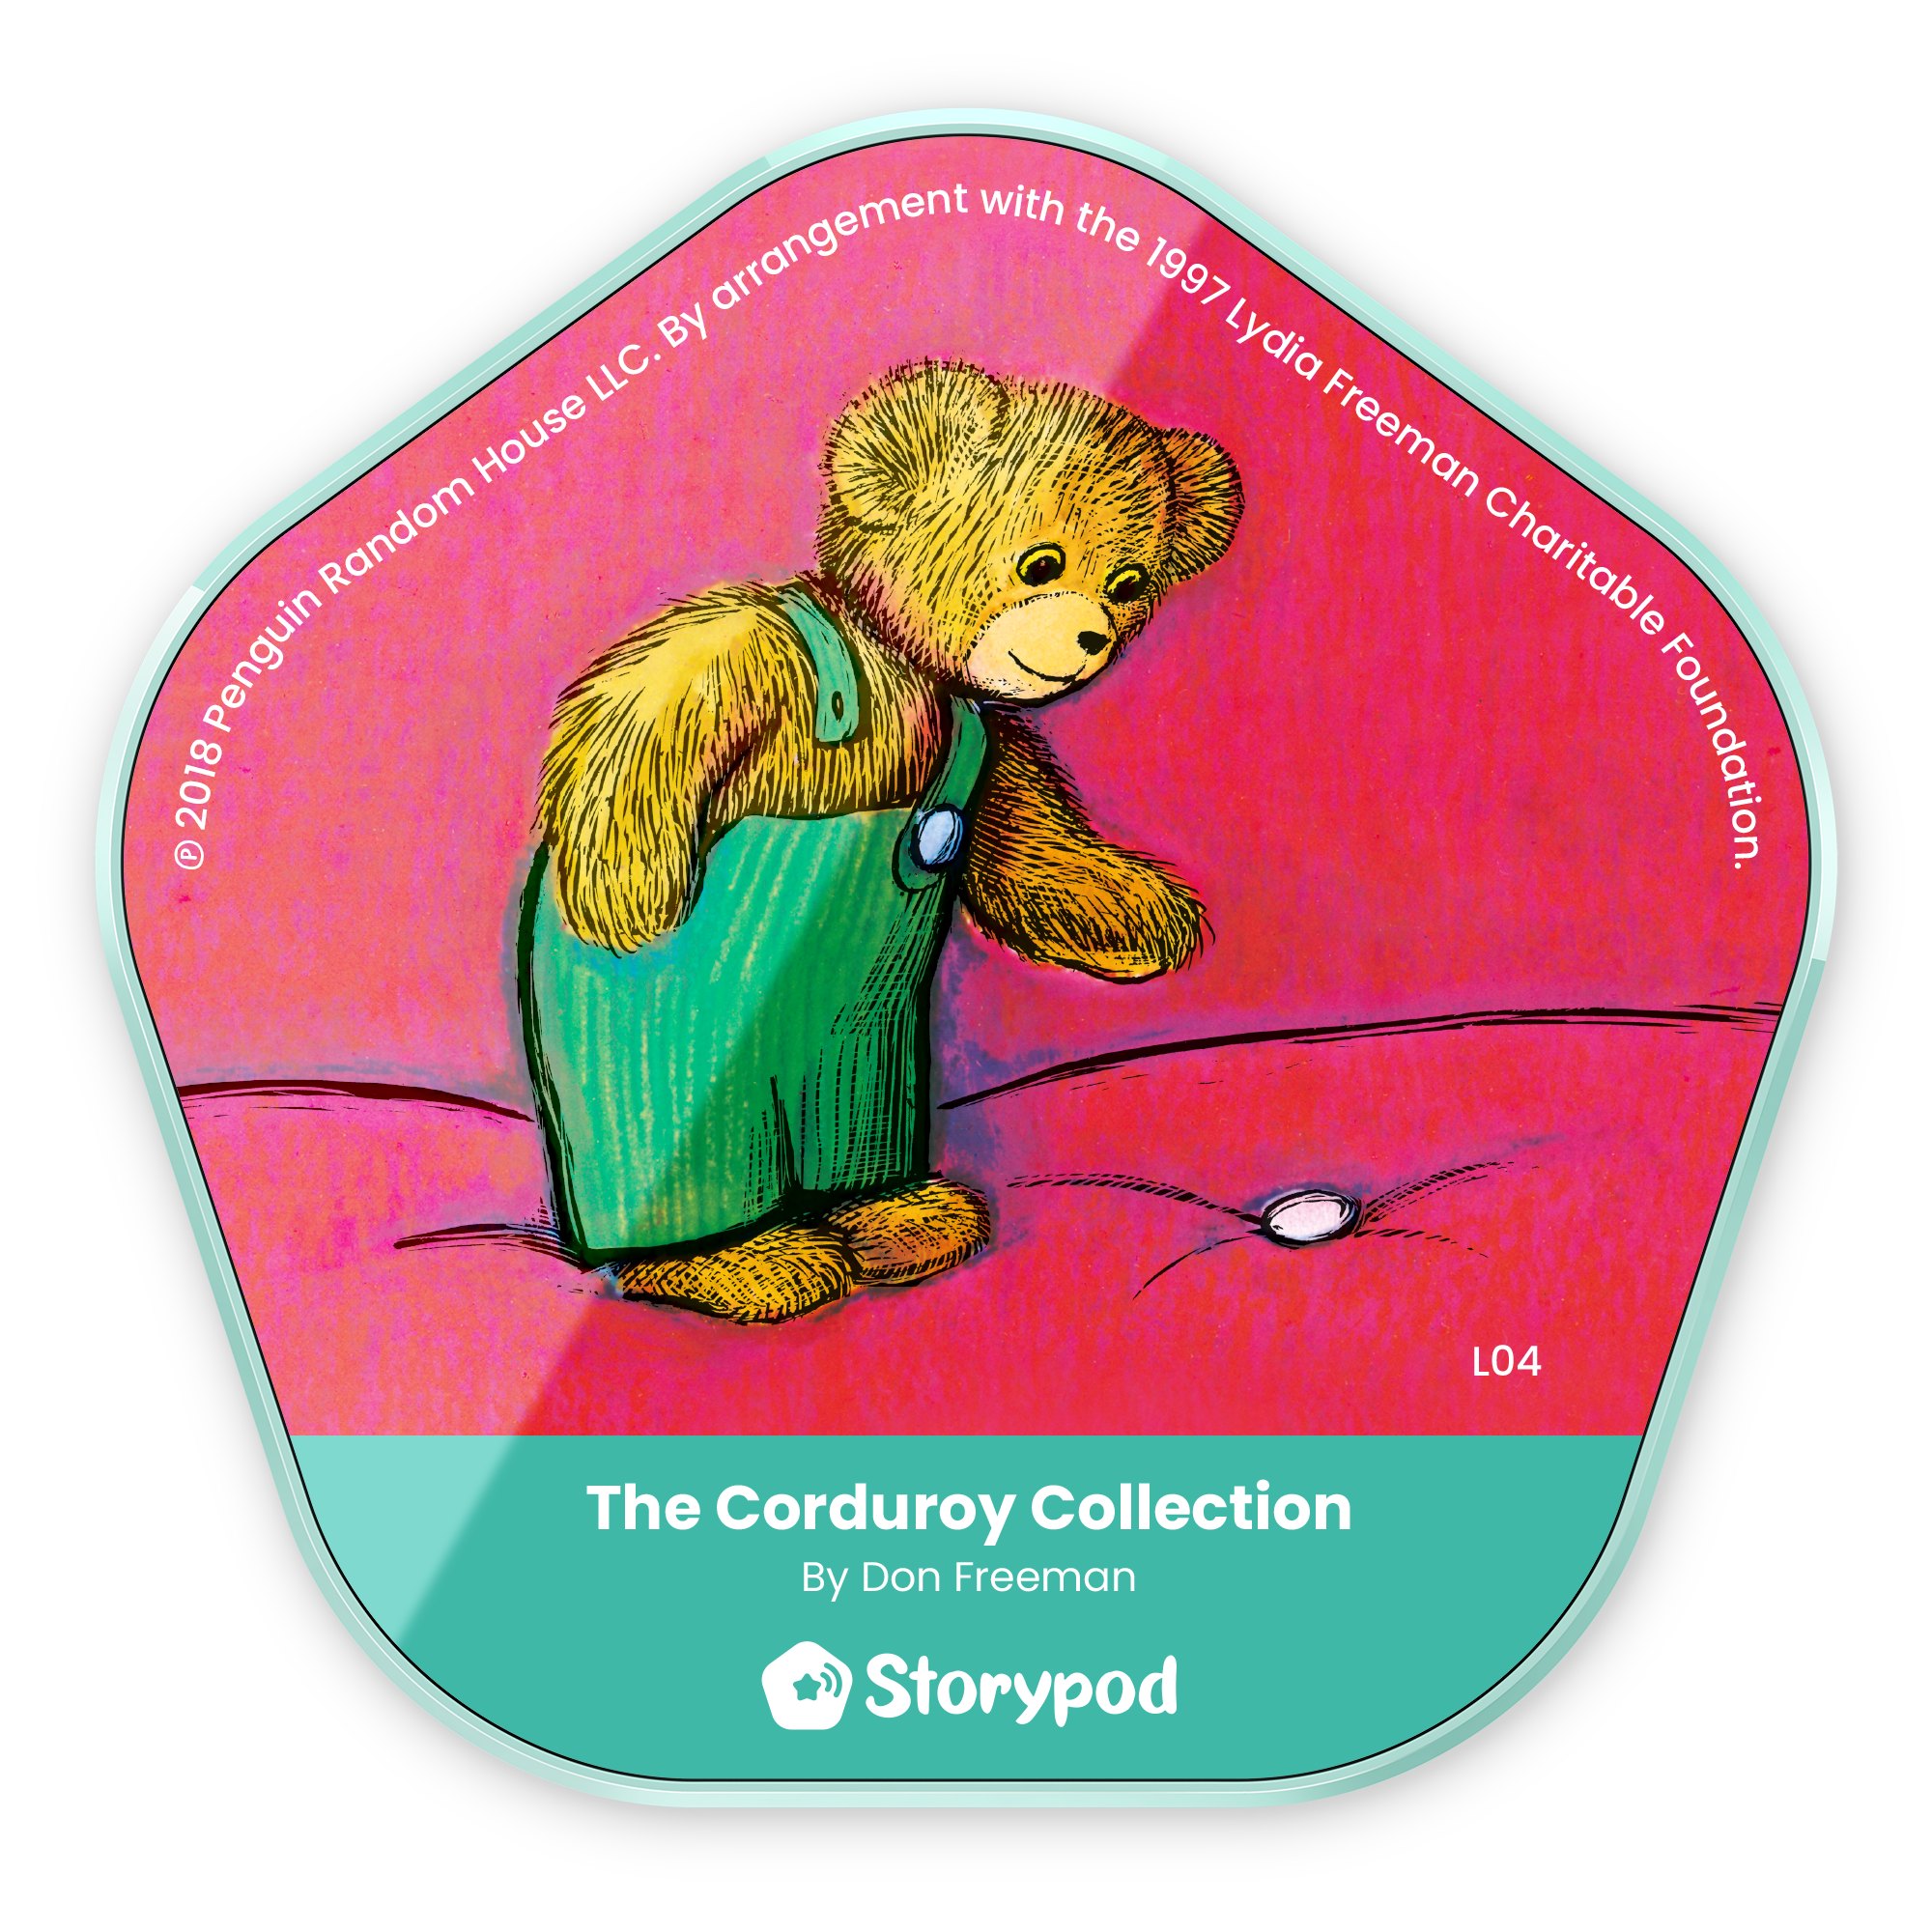 The Corduroy Collection